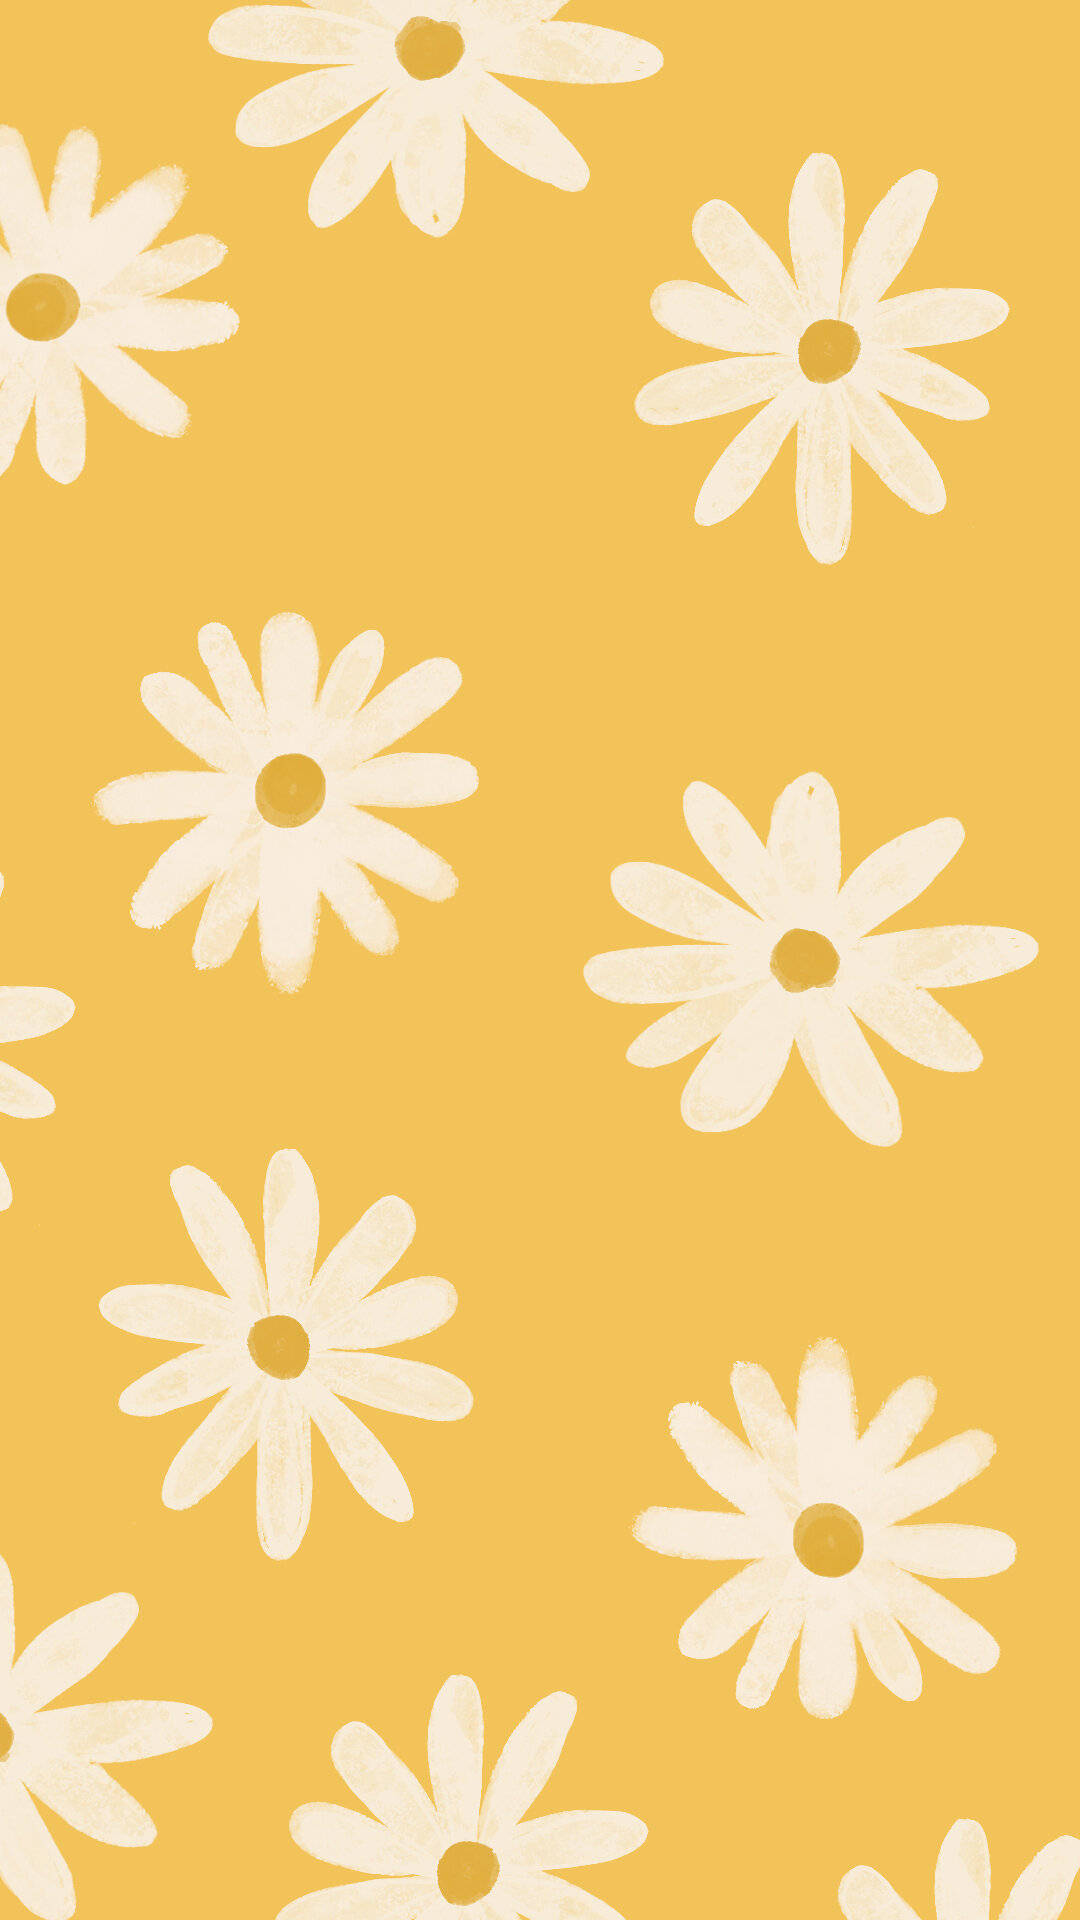 Download Yellow Illustration Of White Daisy Iphone Wallpaper ...